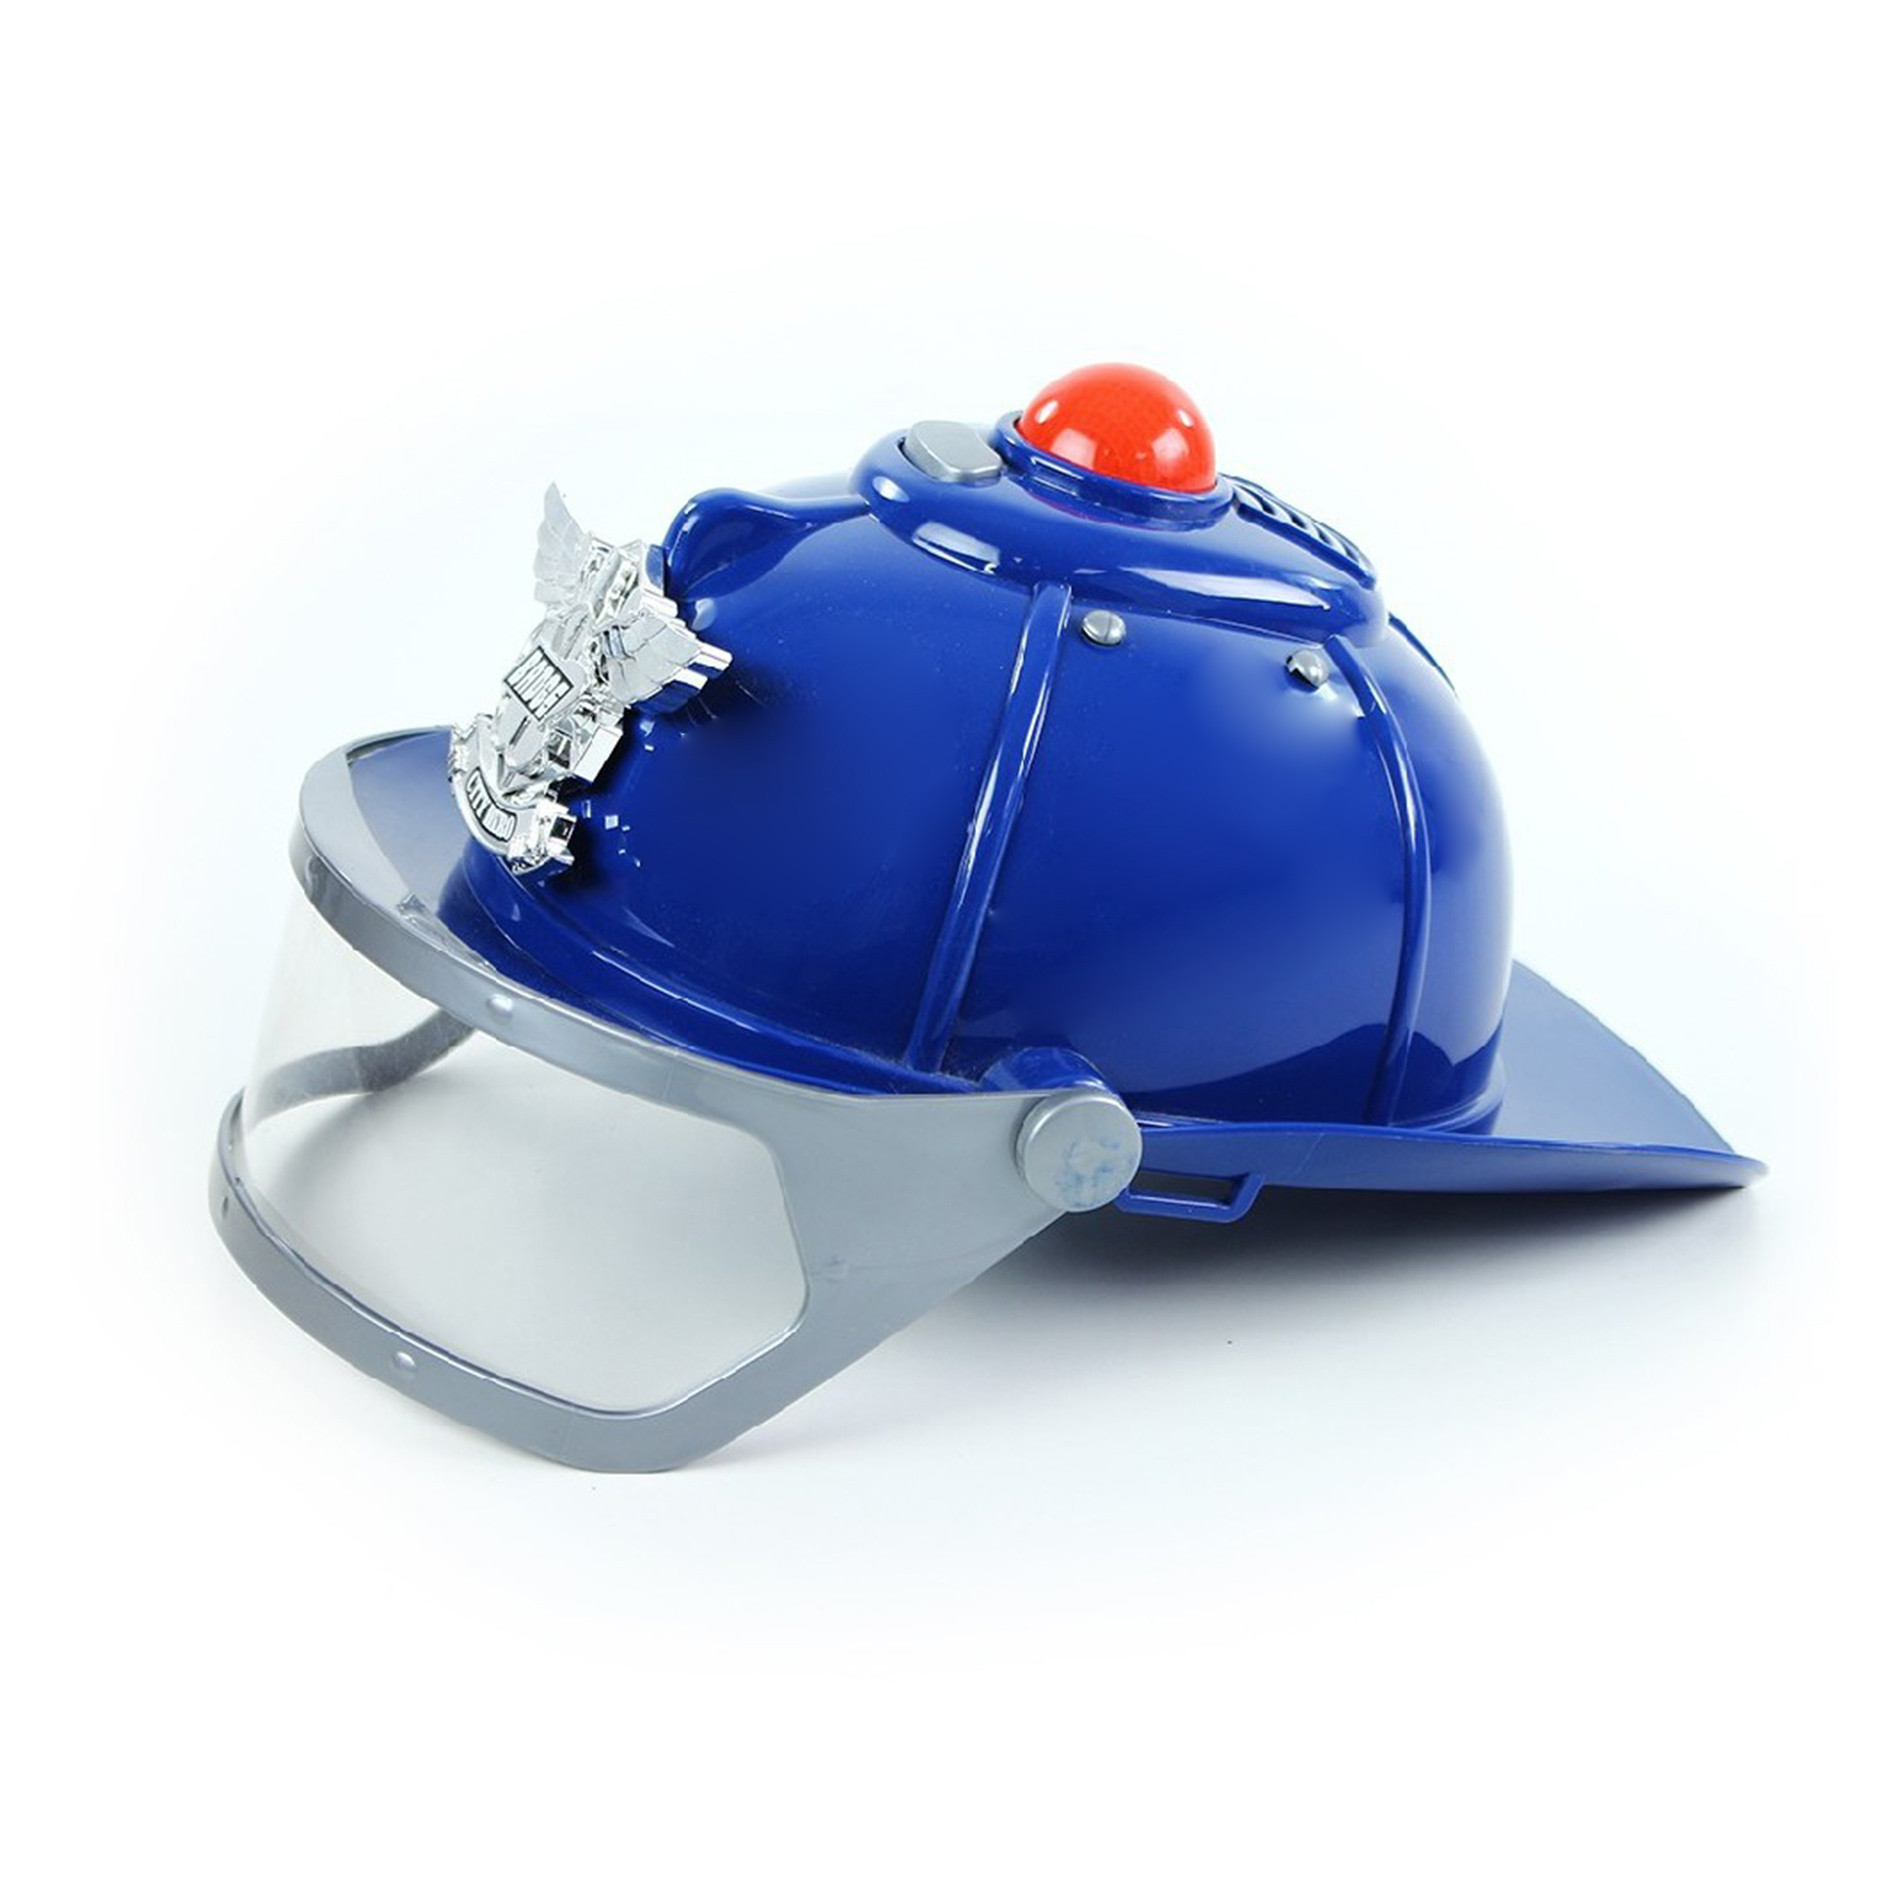 the police helmet with sound and light